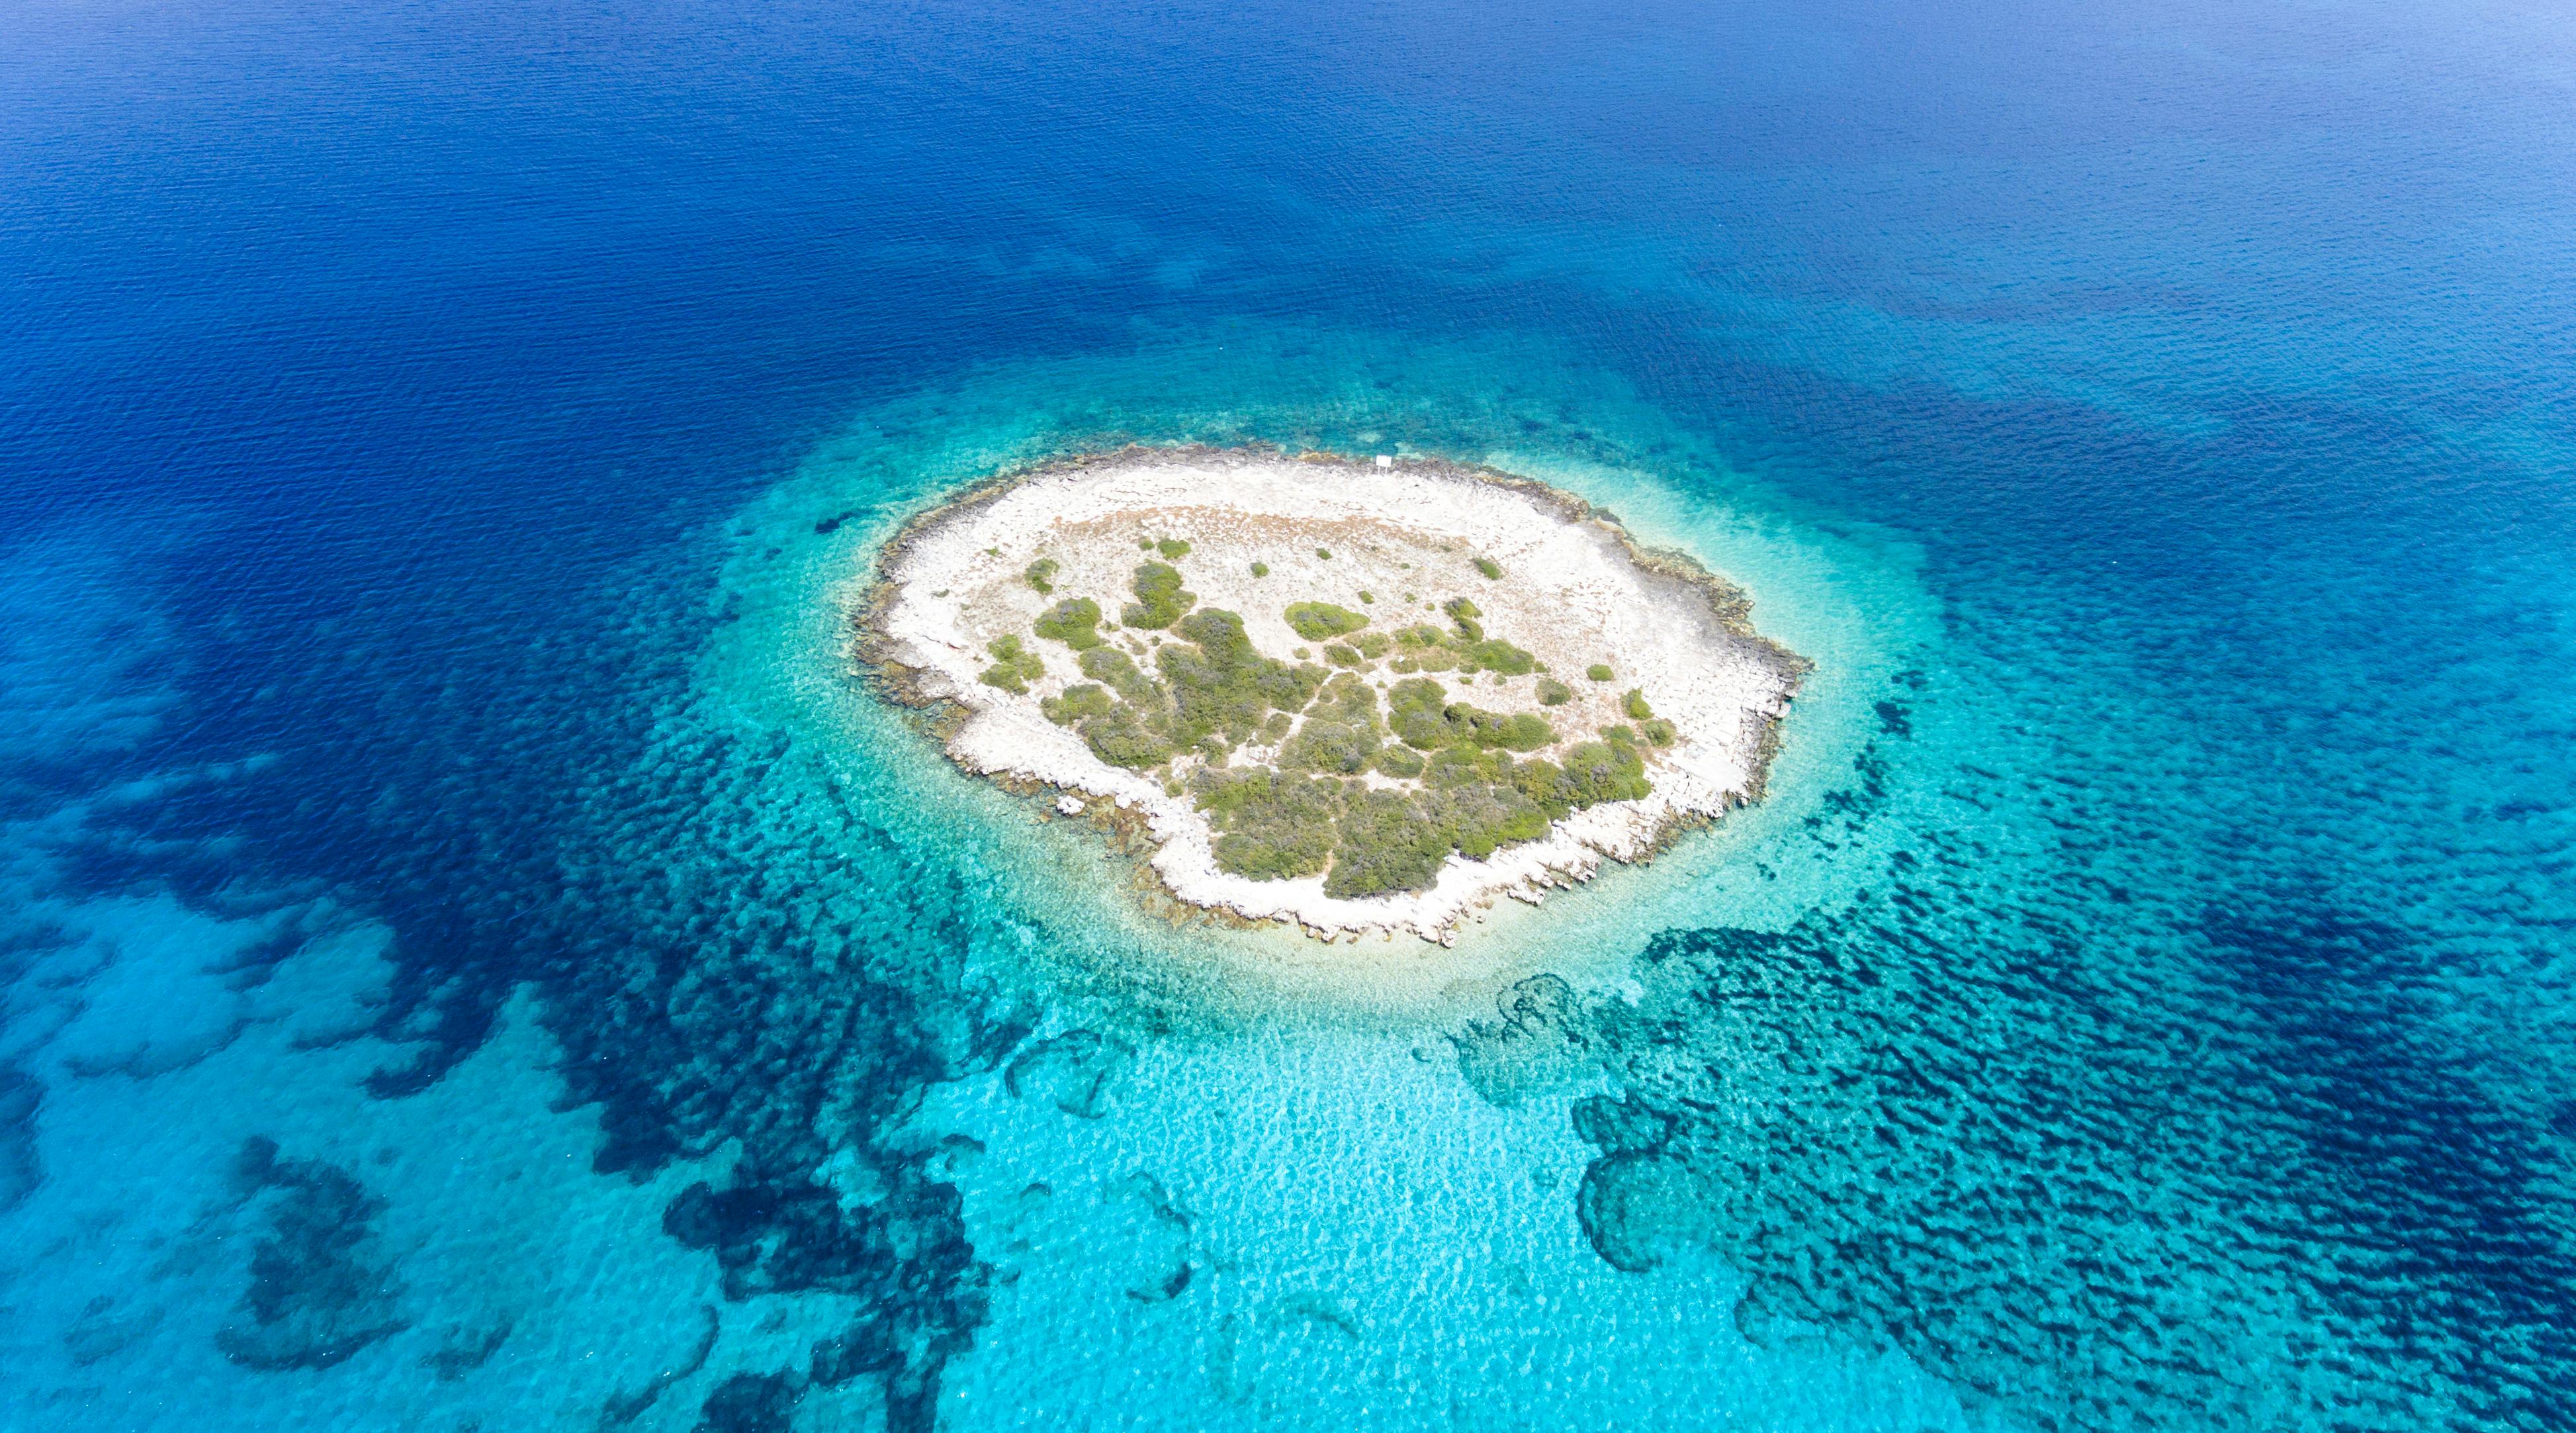 aerial view photography of islet surround by body of water